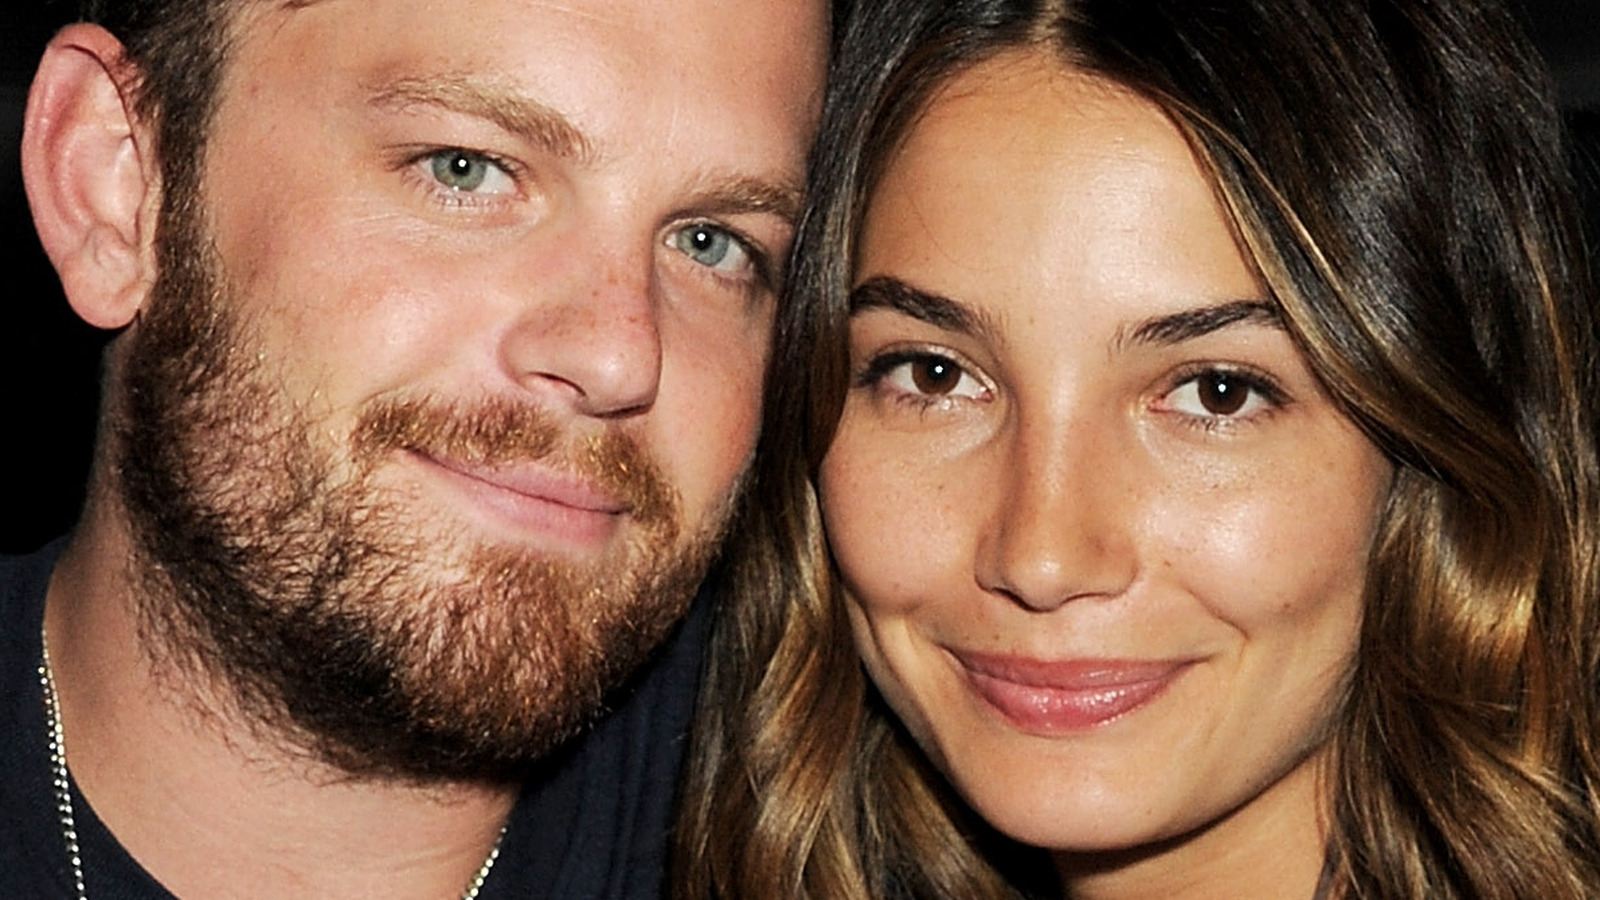 Lily Aldridge And Caleb Followill's Love Story Started At A Music Festival